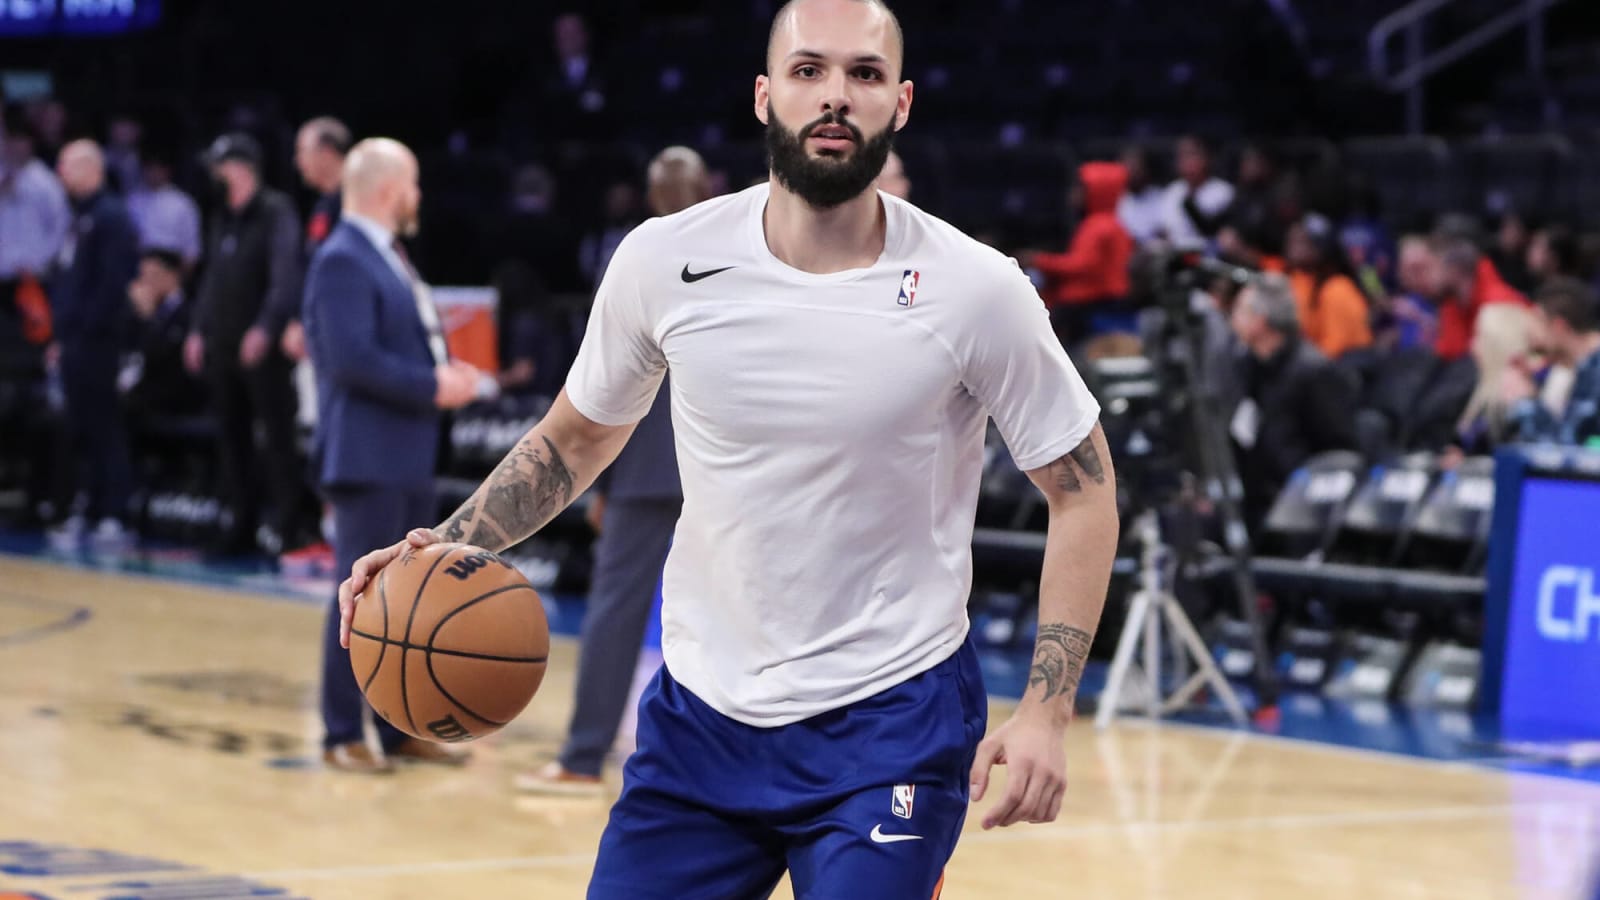 Knicks’ Evan Fournier knows big game vs 76ers isn’t a ticket back to rotation: ‘It was like a fun one-night stand’